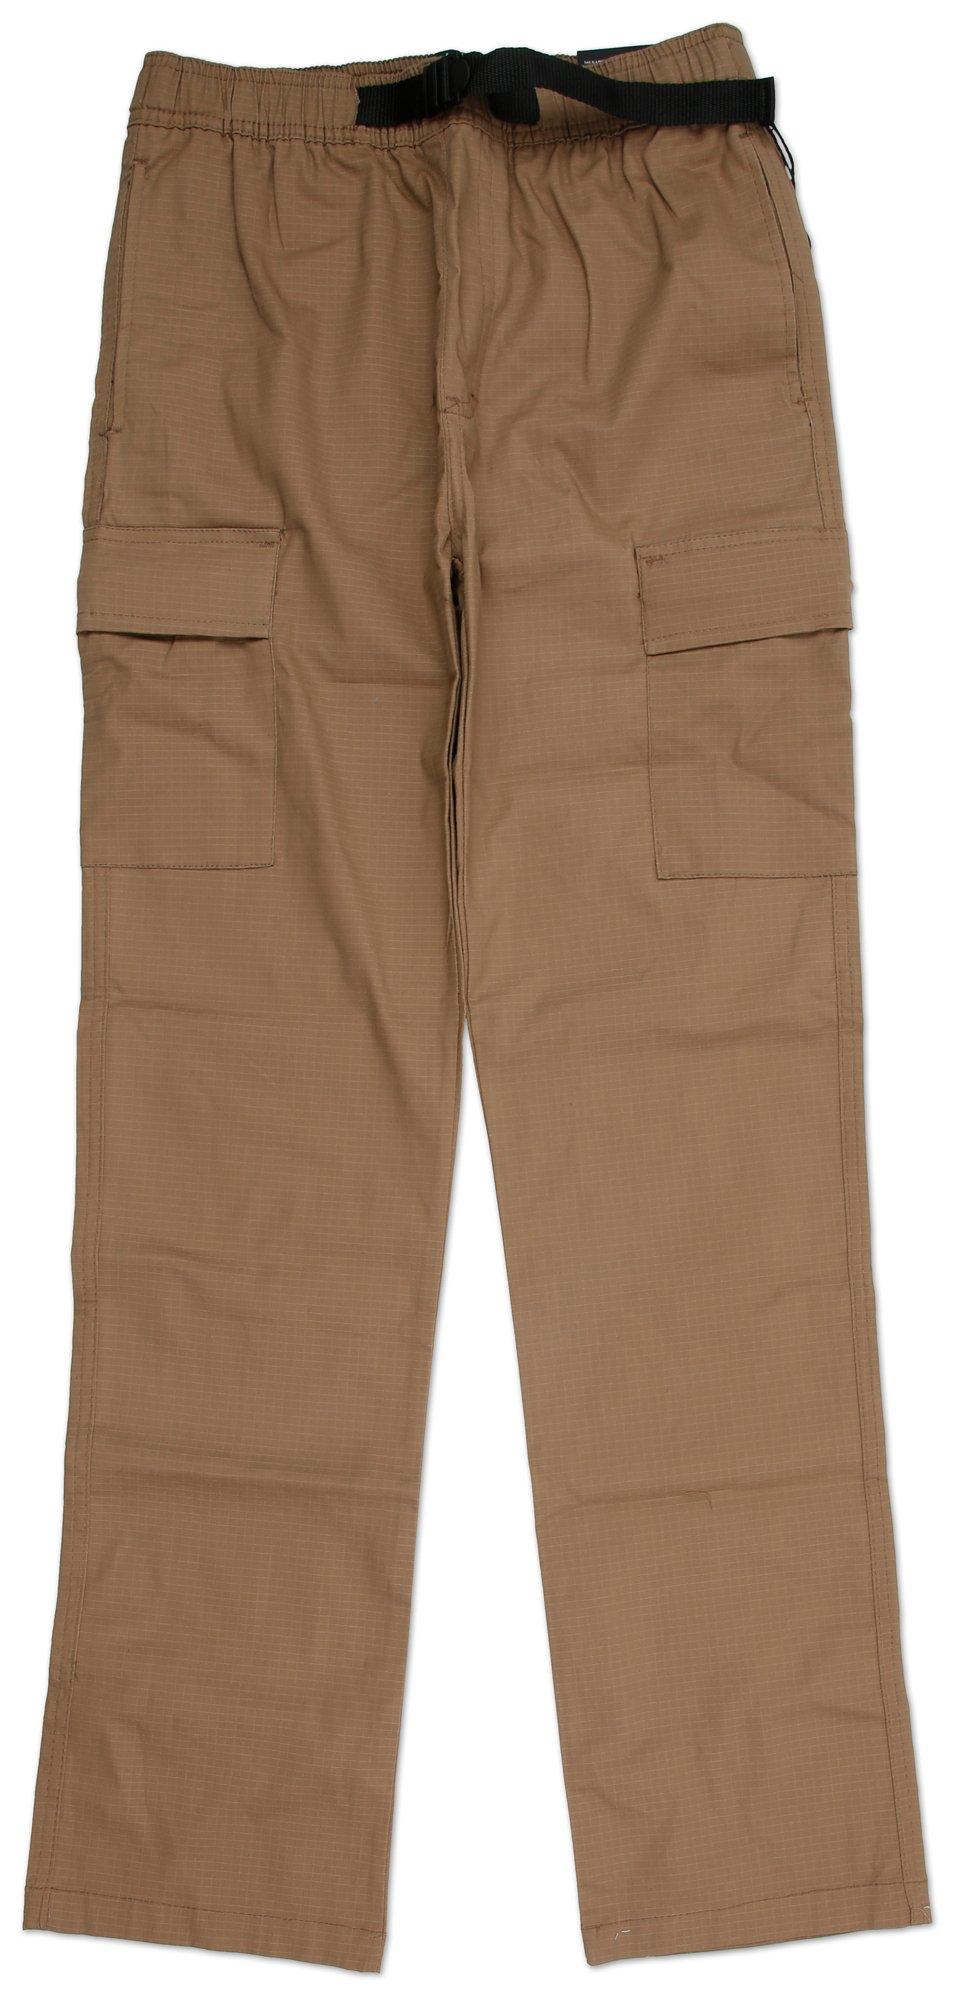 Men's Solid Ripstitch Twill Cargo Pants